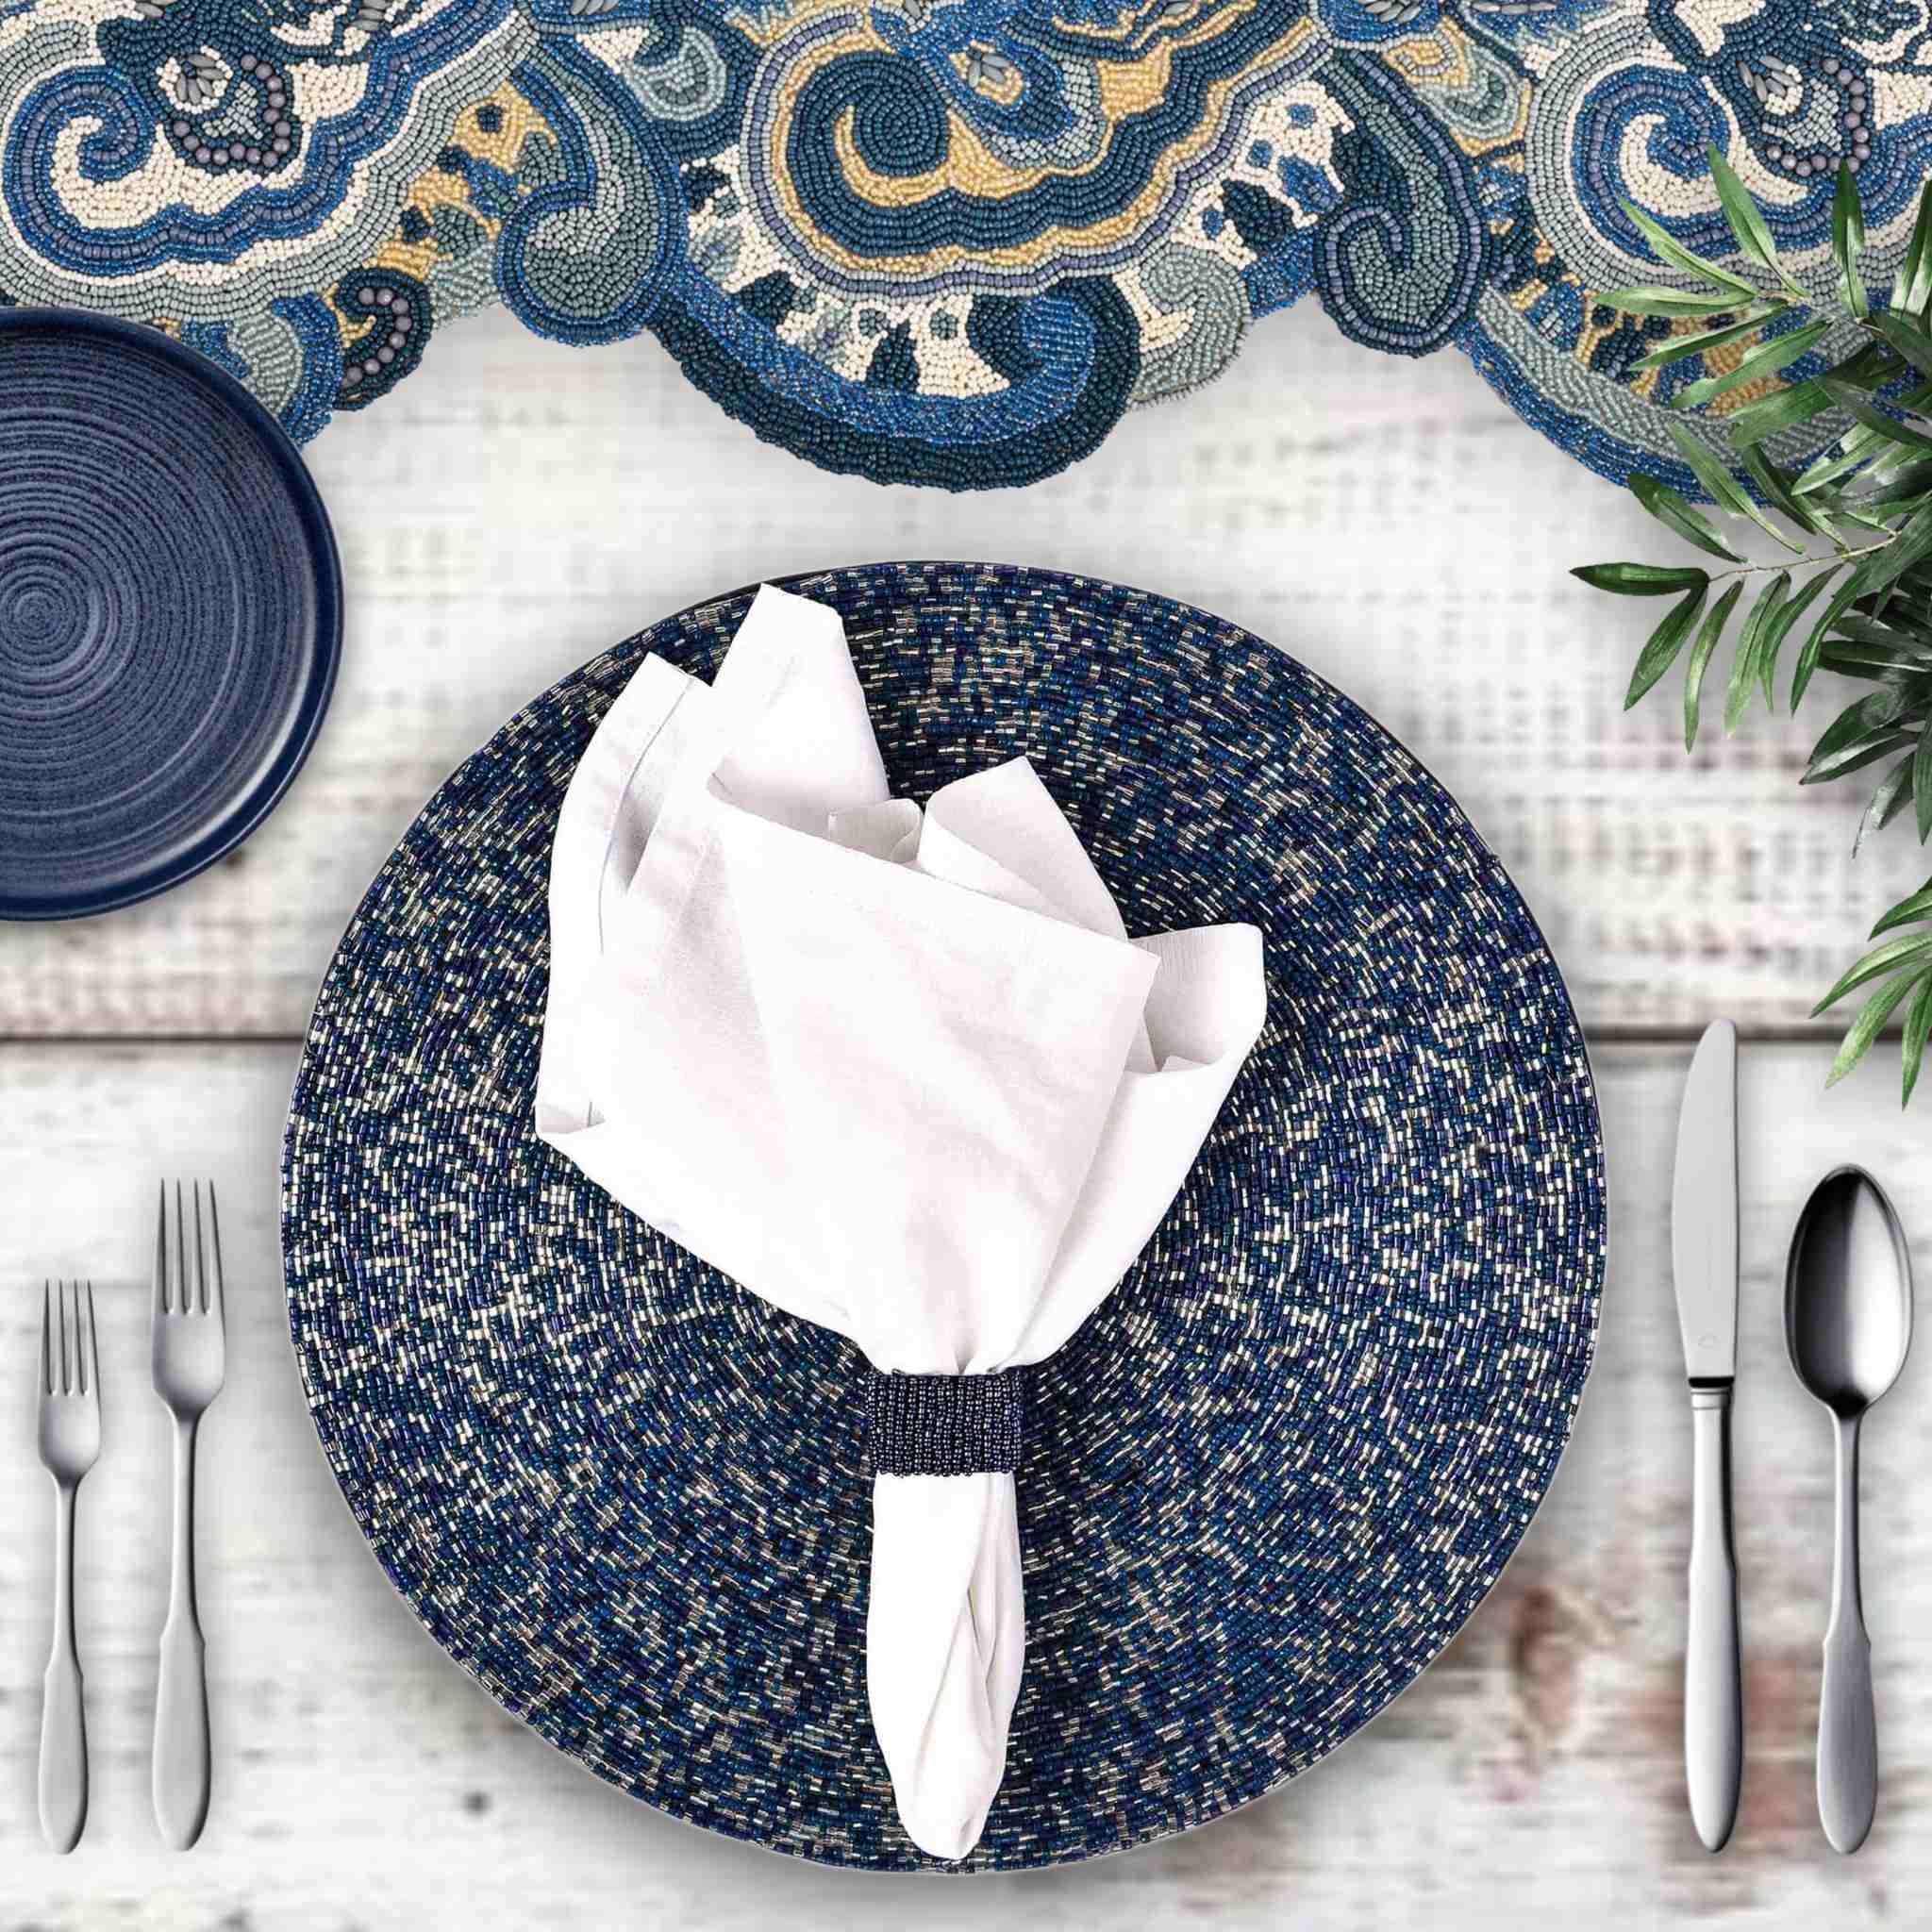 Embroidered Placemat in Blue & Silver, Set of 2/4